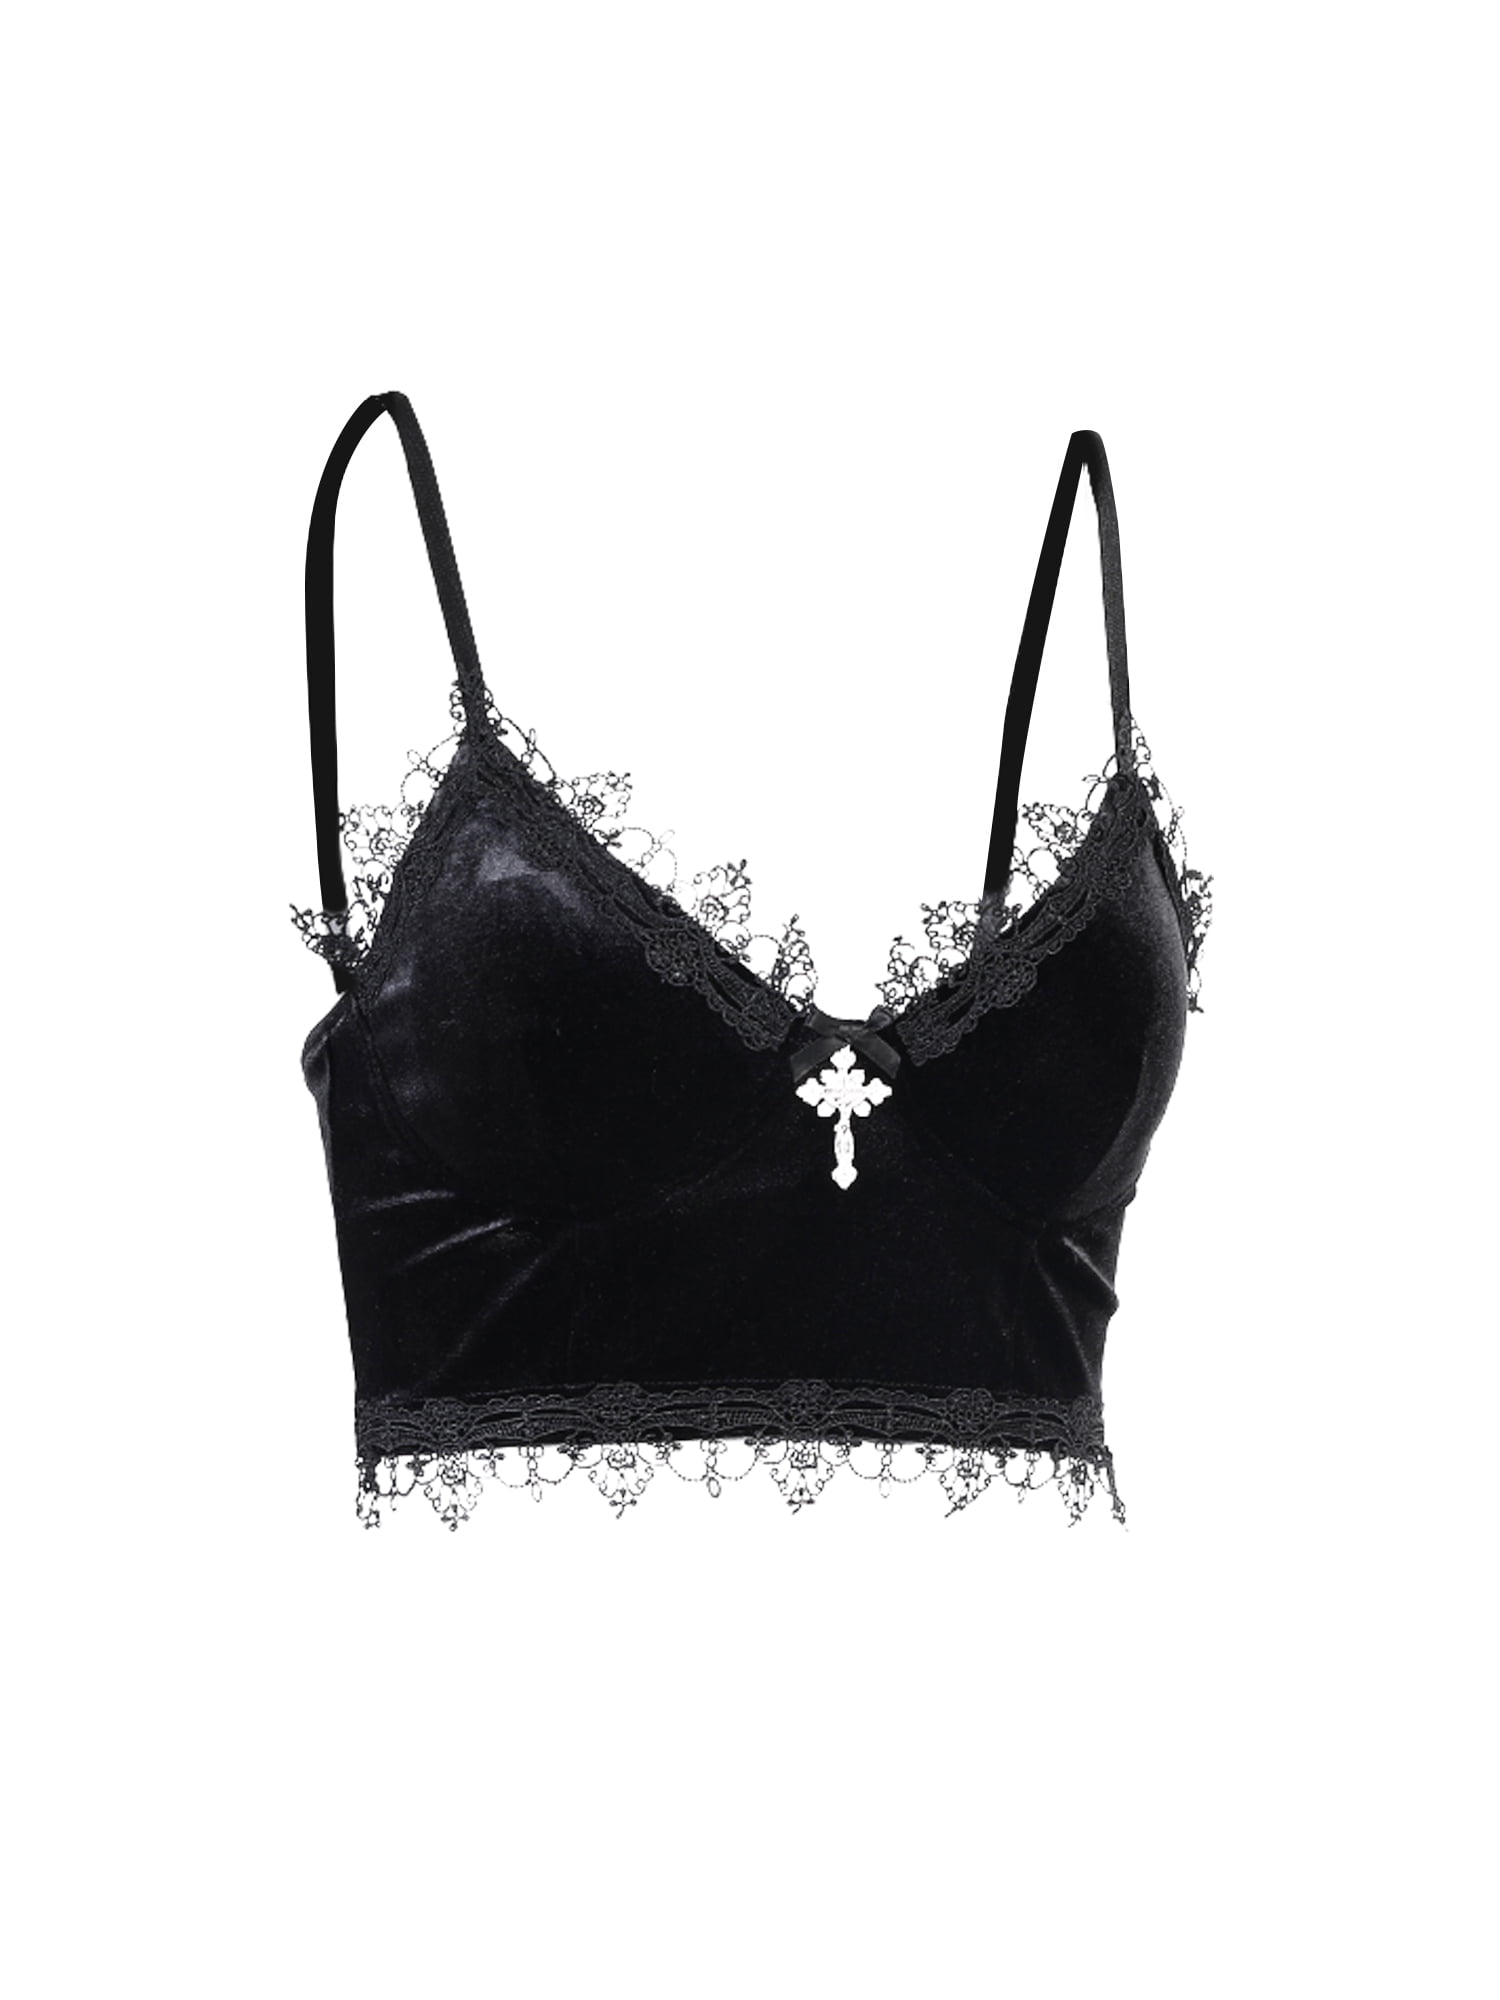 Black Crochet Lace V Neck Lace Camisole With Built In Bra And Padded Strap  Sleeveless, Sexy, And Fashionable From Starbrand, $16.83